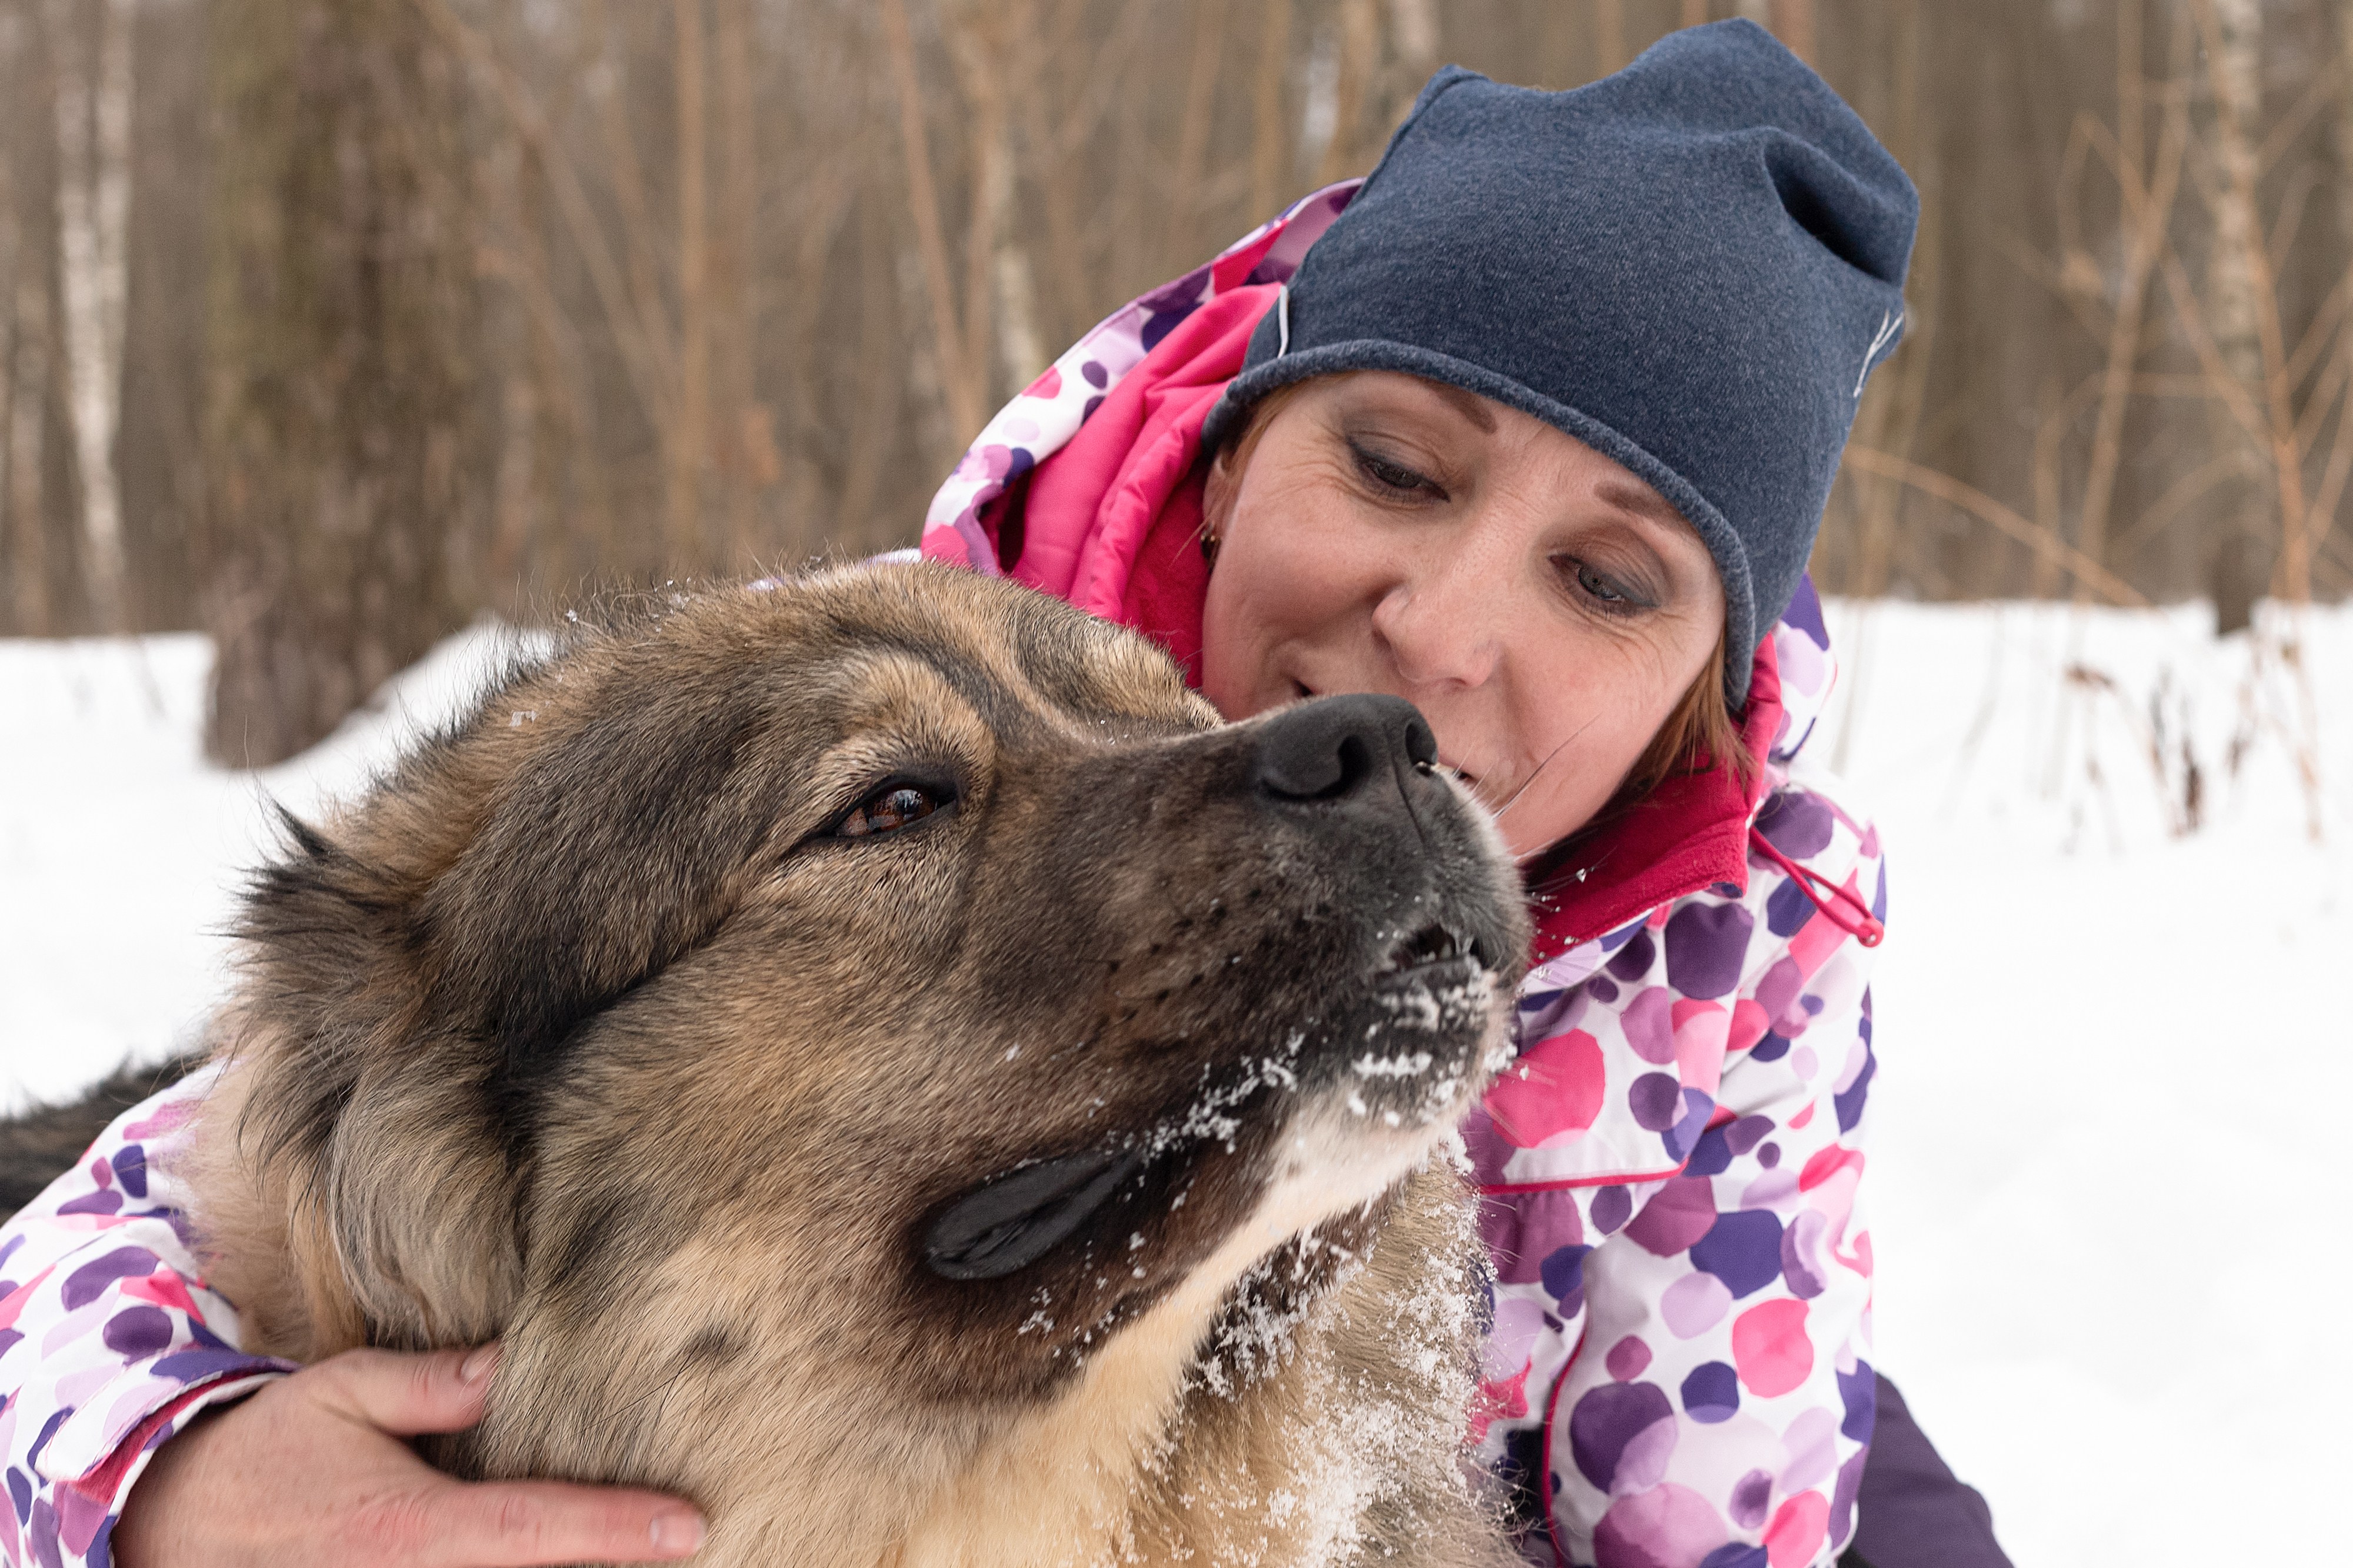 A woman with her arm around a big fluffy dog.